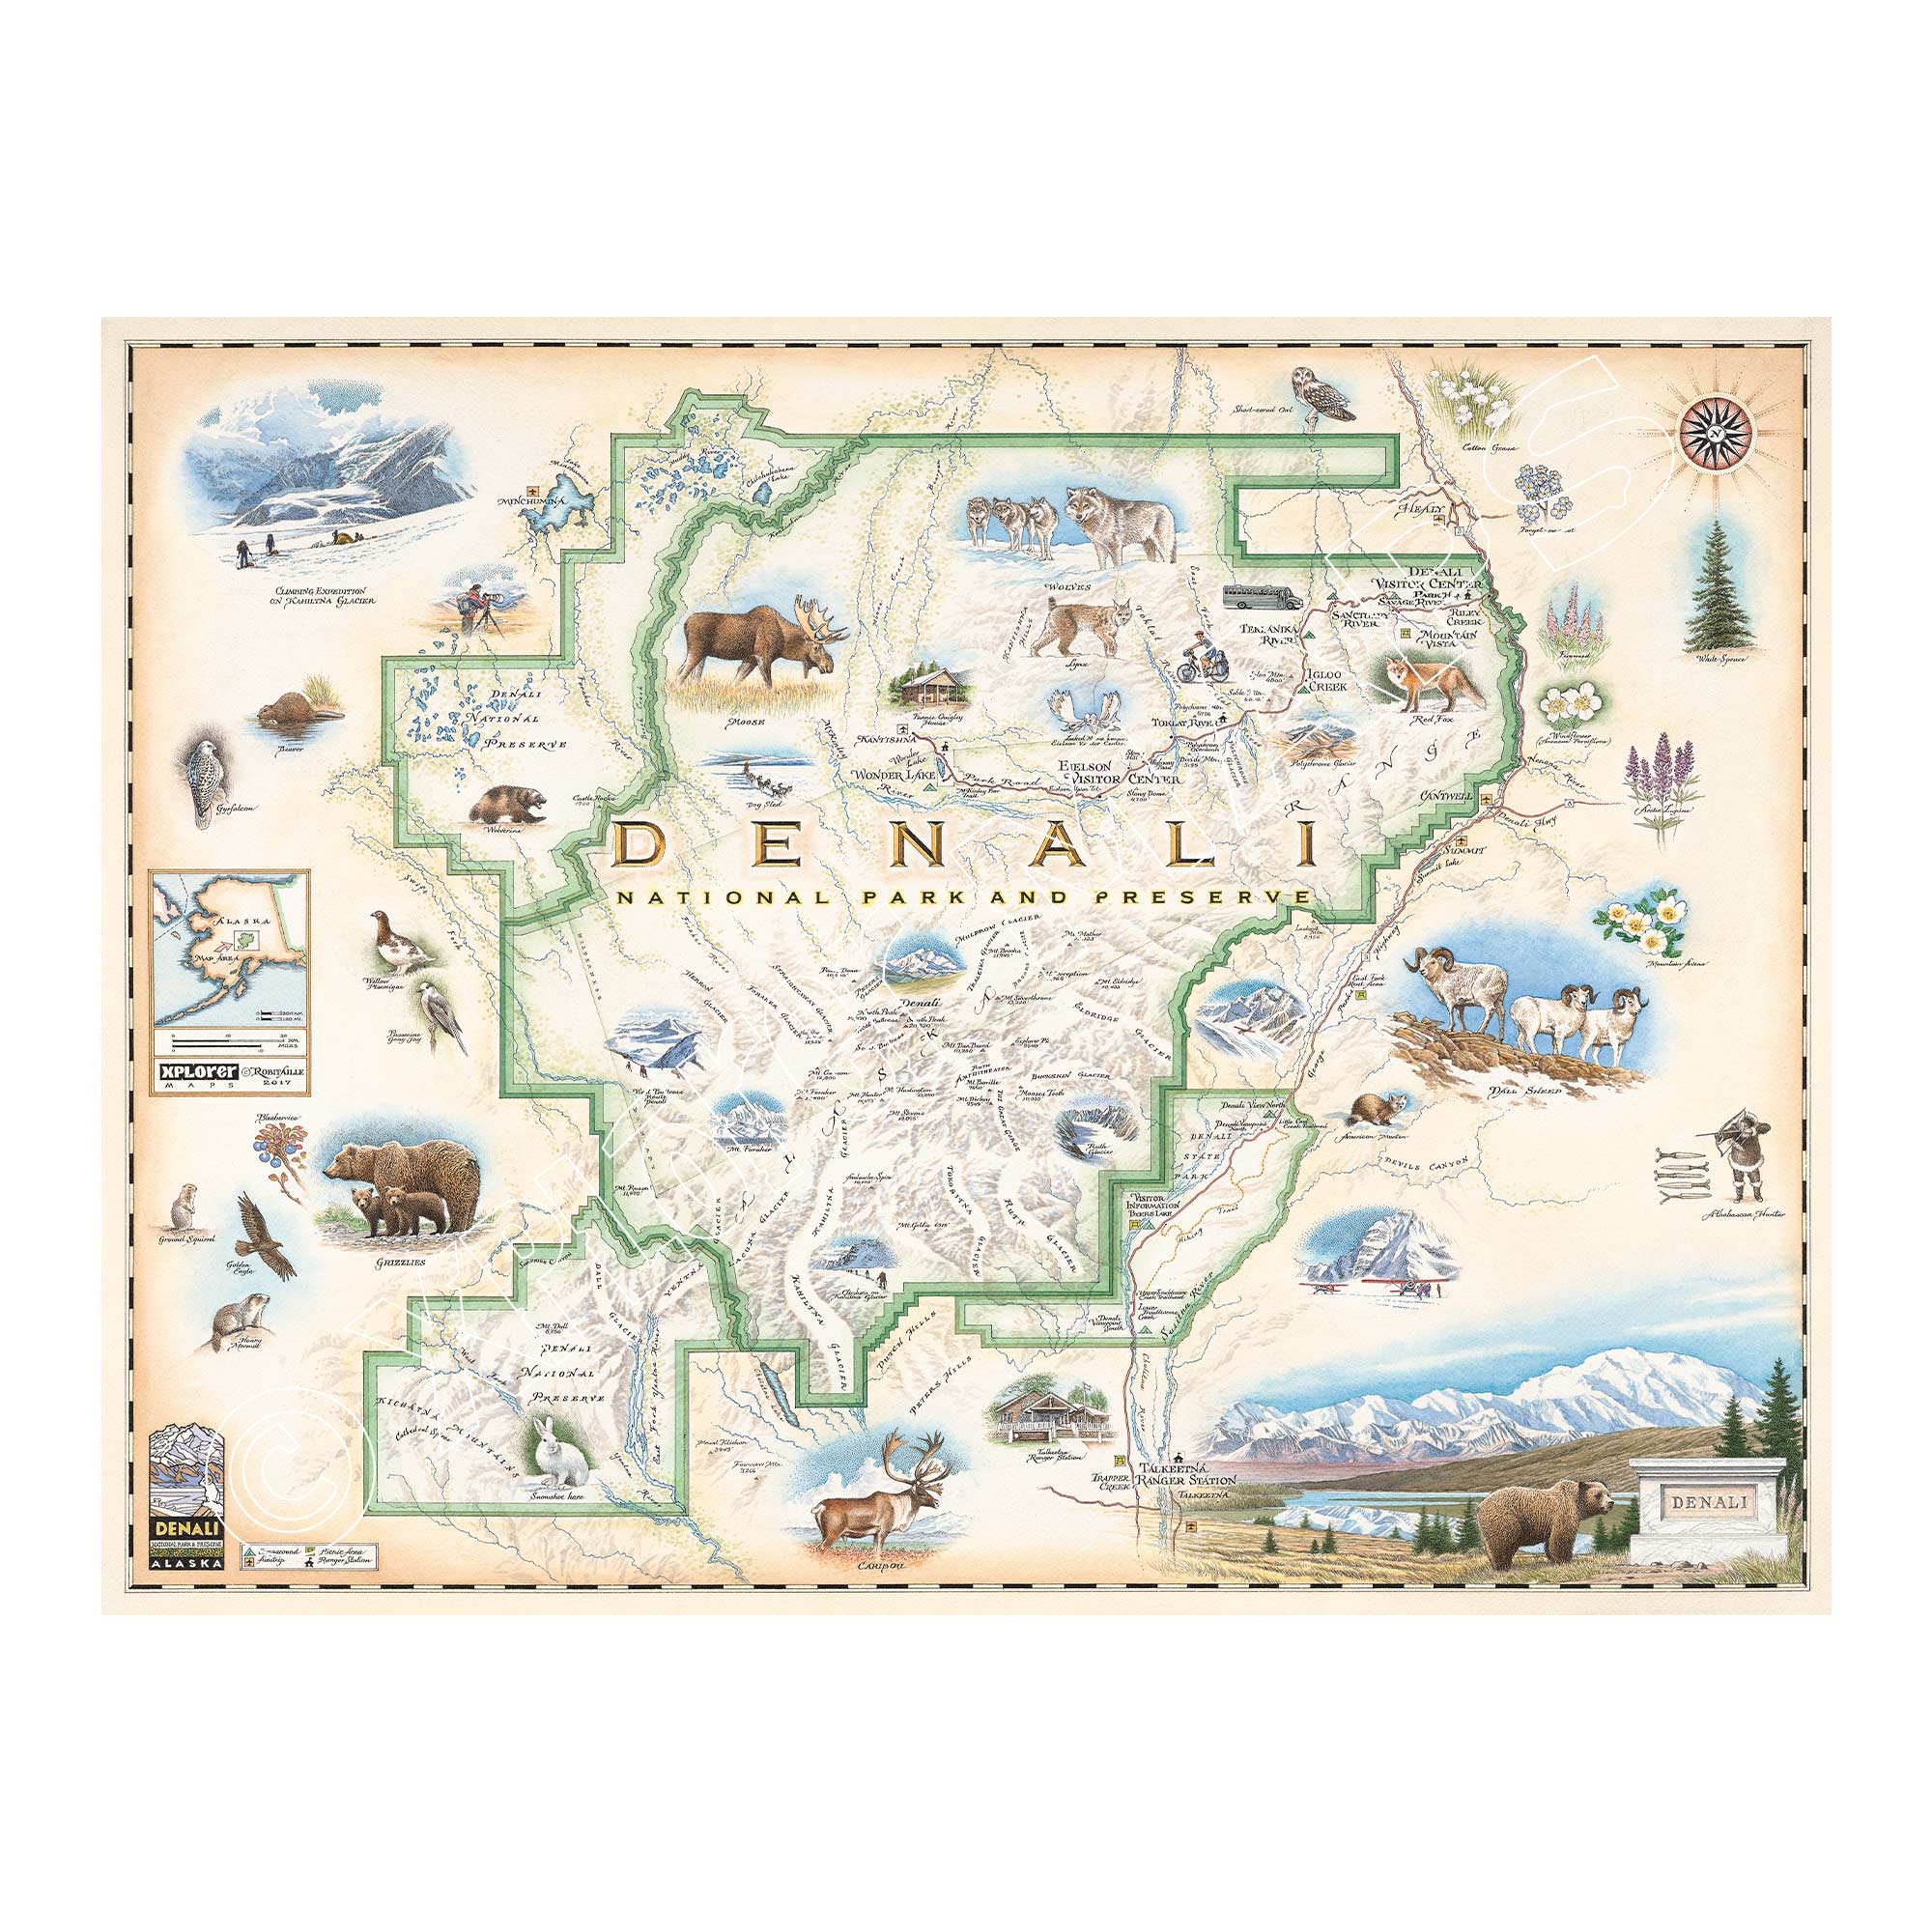 Denali National Park hand-drawn map in earth tones of beige and green. Featuring illustrations of the major flora and fauna found in the park, such as grizzly bears, wolverines, moose, lynx, Dall sheep, and many more. Major attractions are illustrated on the map, like the Talkeetna Visitor Center, Denali Visitor Center, Ruth Glacier, and Kahiltna Glacier. Measures 24x18.